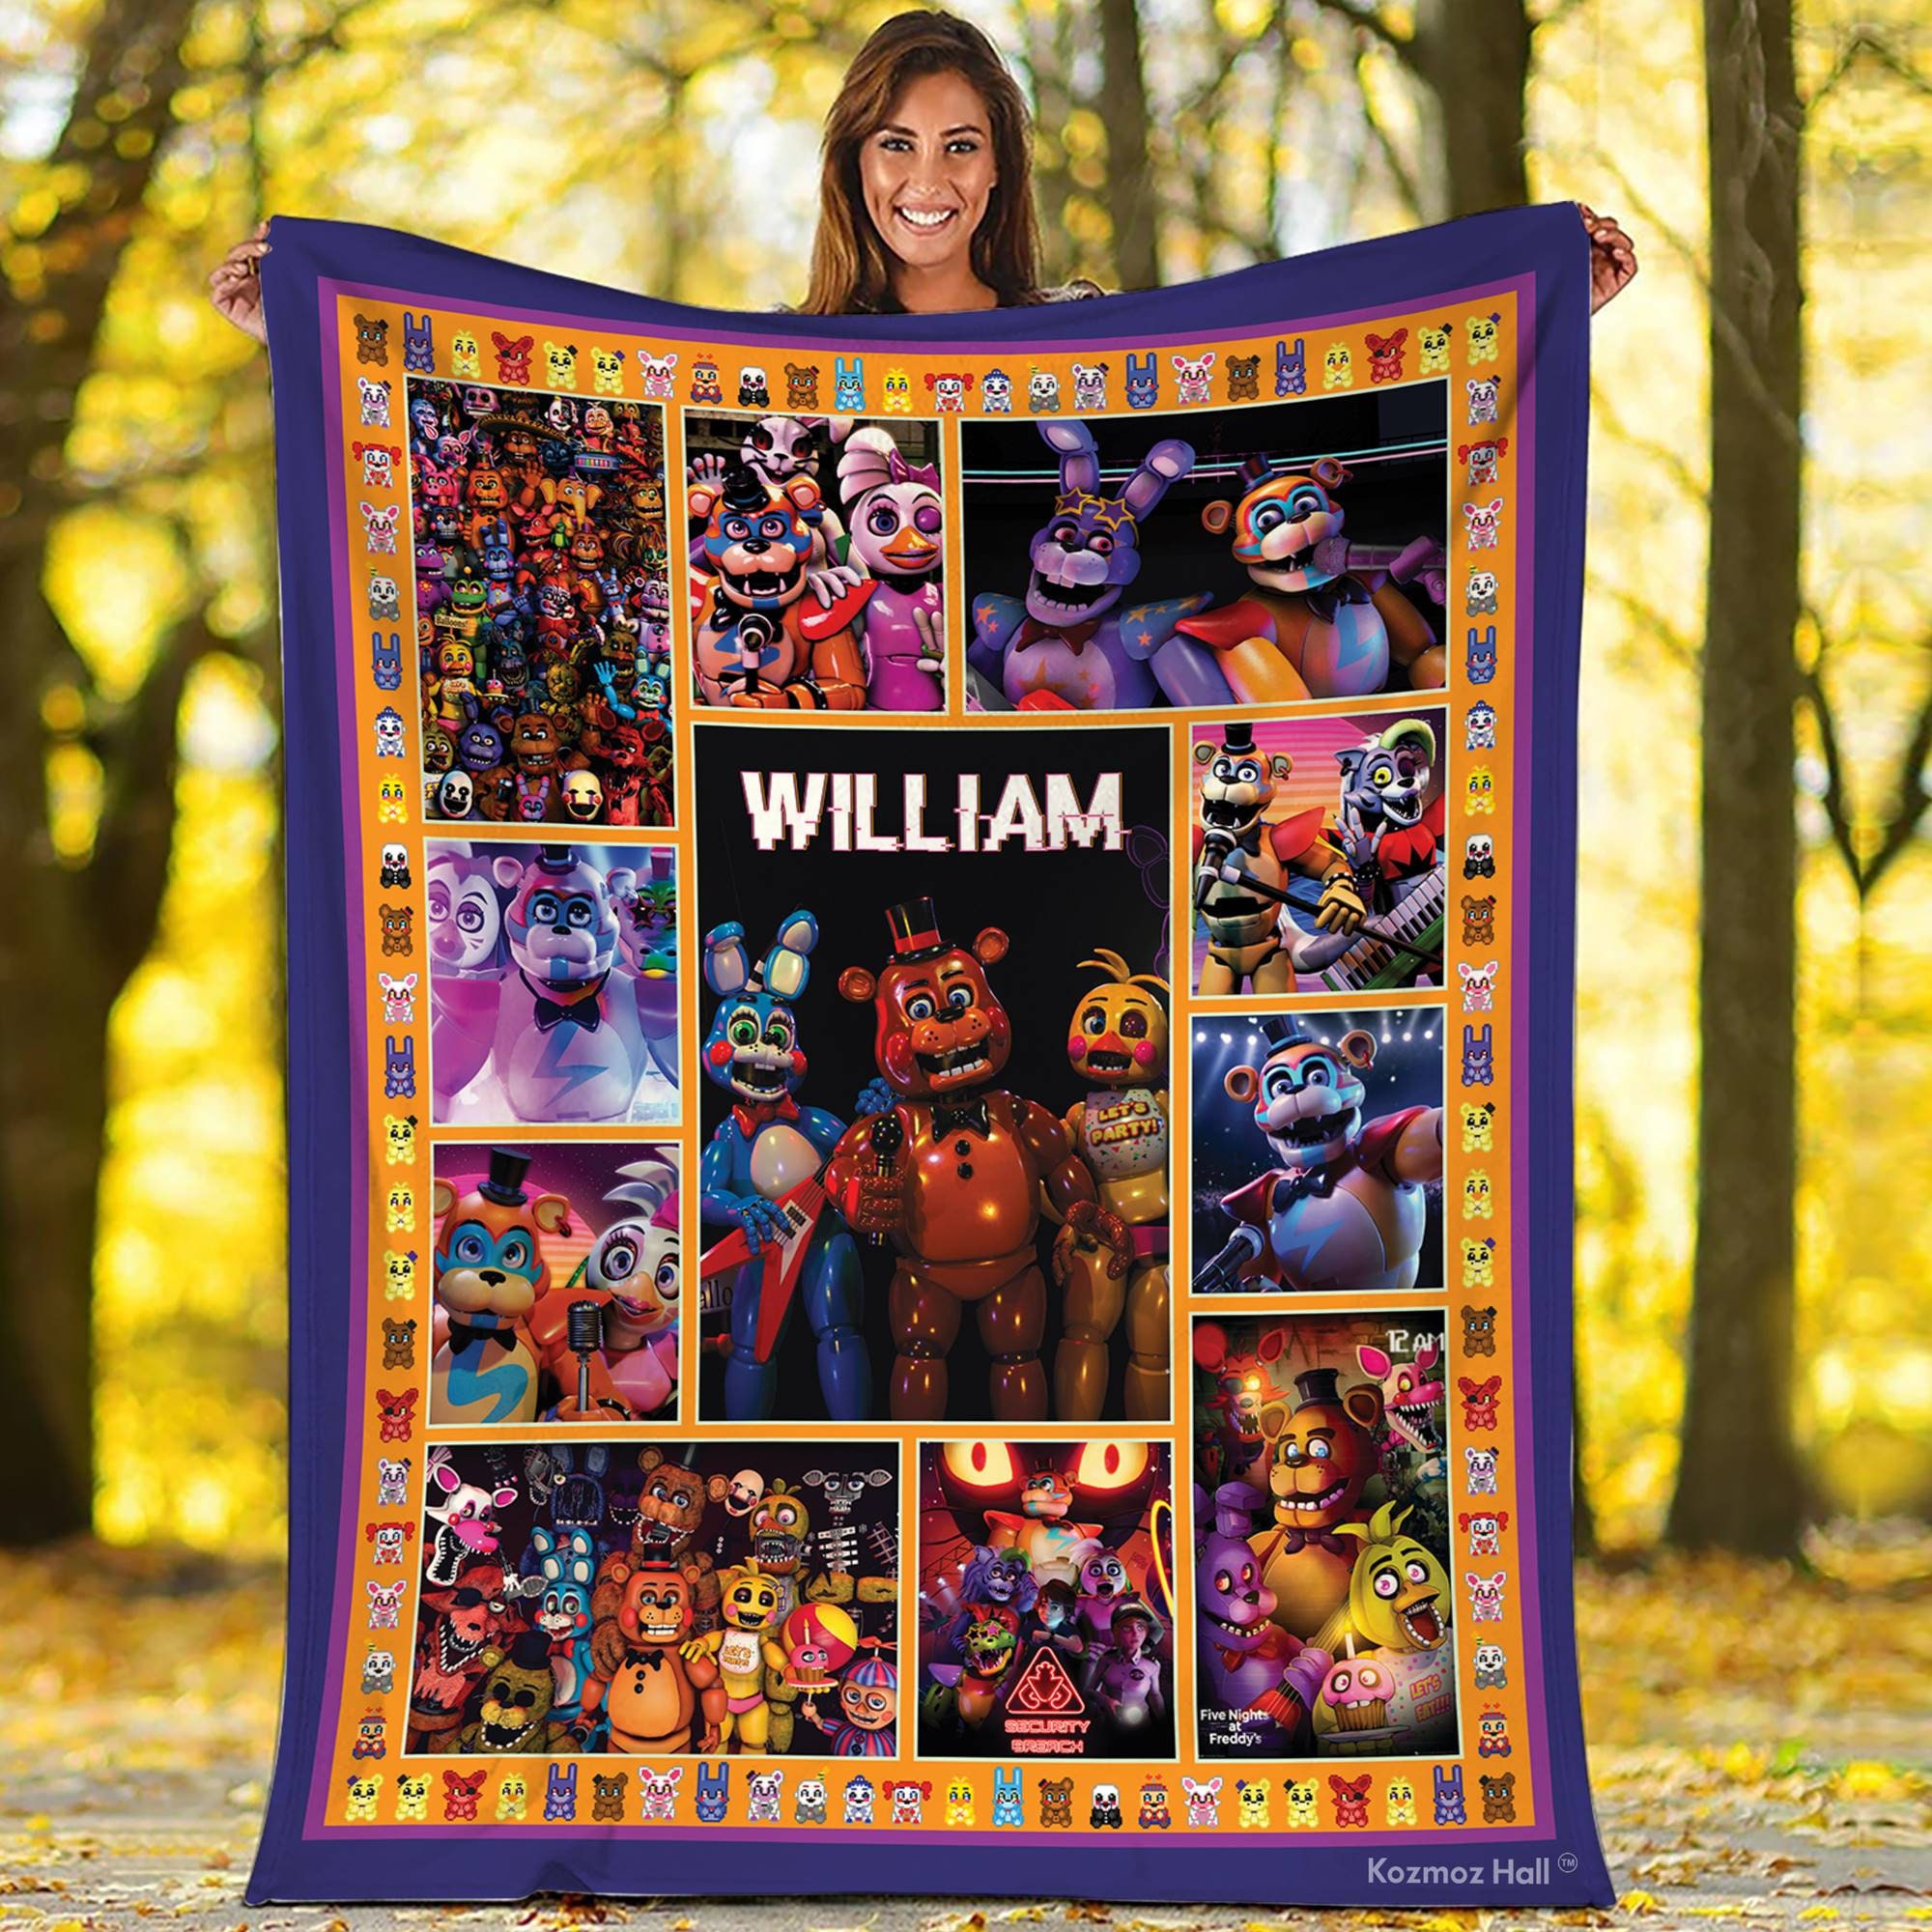 Five Nights at Freddy's Bedding Sets Duvet Covers – EBuycos